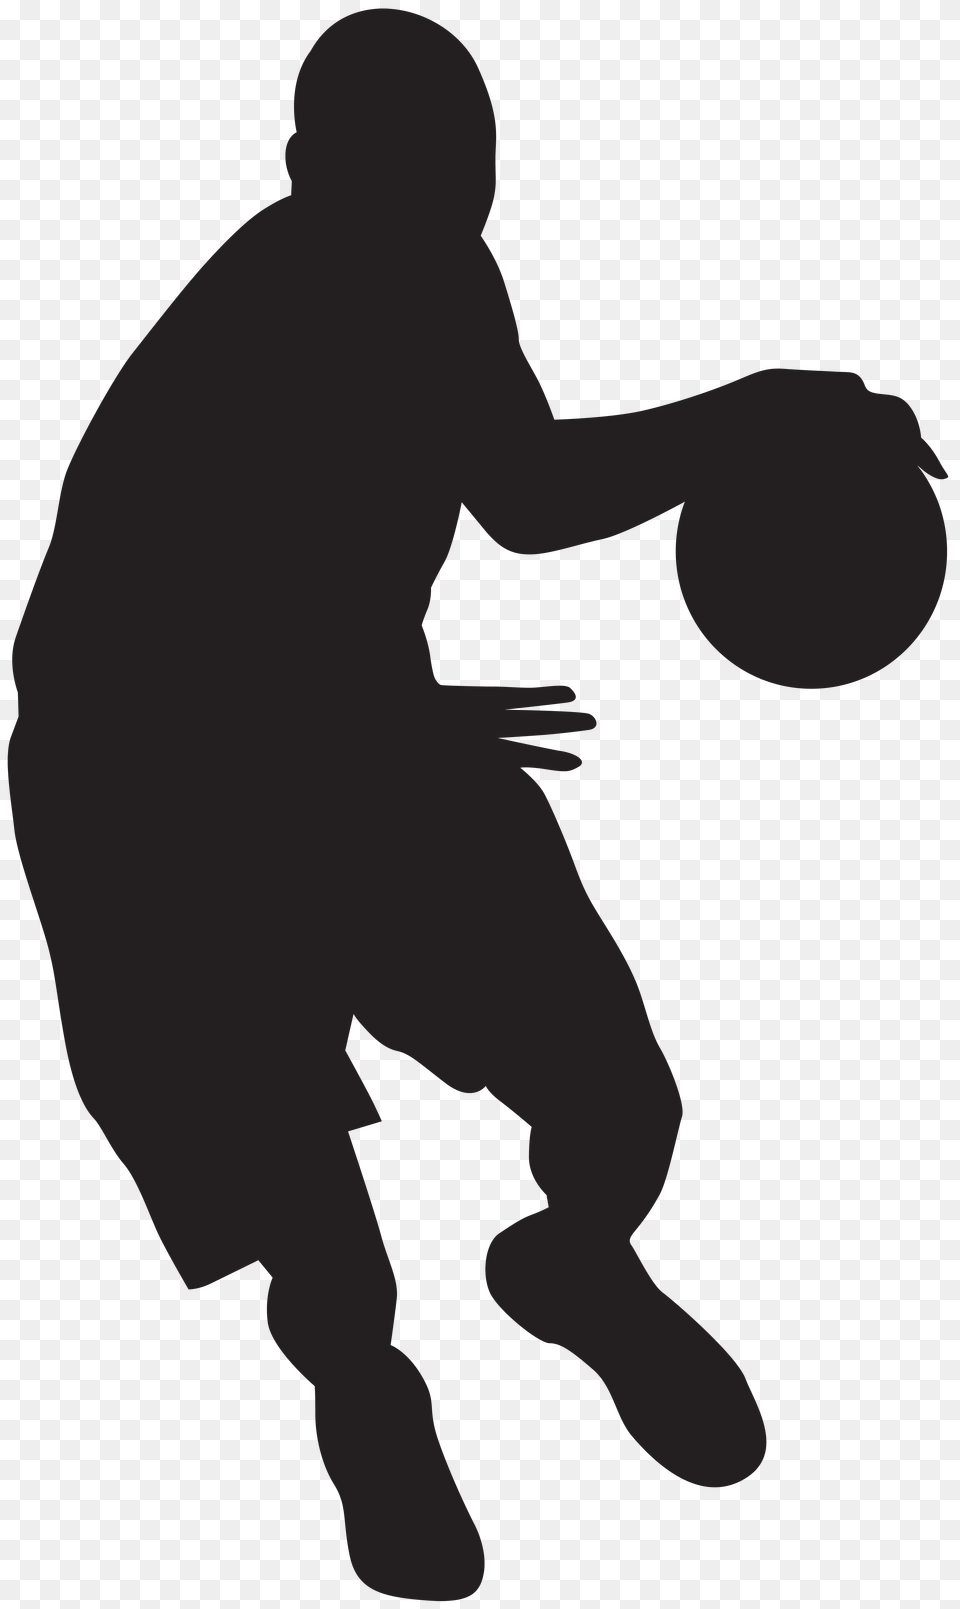 Basketball Player Silhouette Clip Art Gallery, Cross, Symbol Png Image